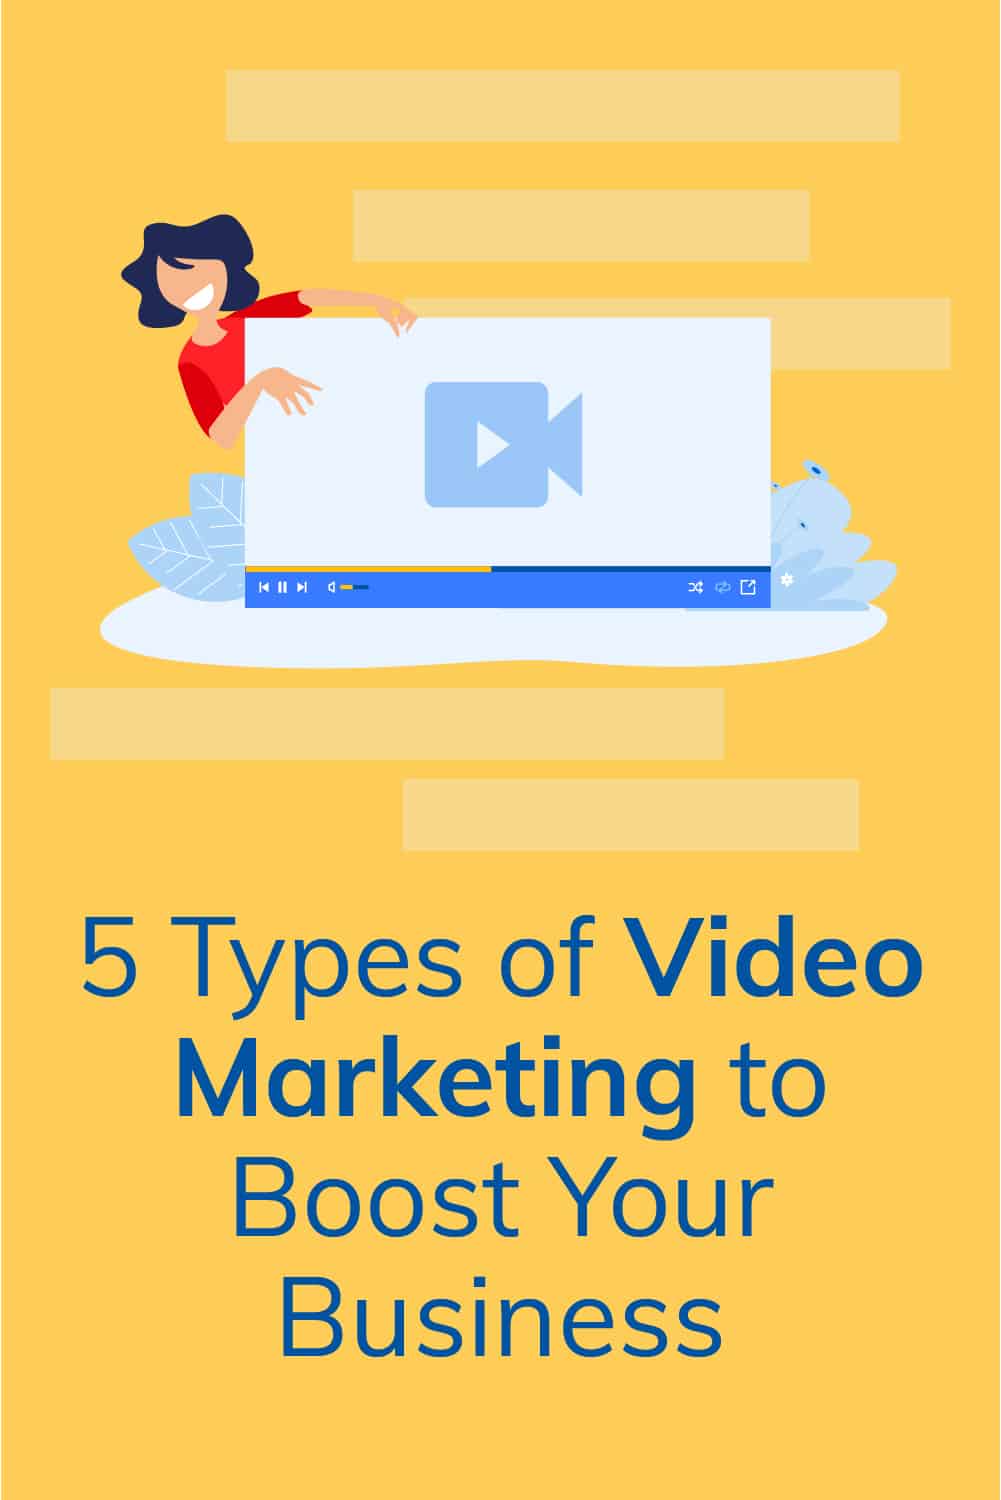 Video marketing is still the king of the hill when it comes to boosting your business! via @scopedesign